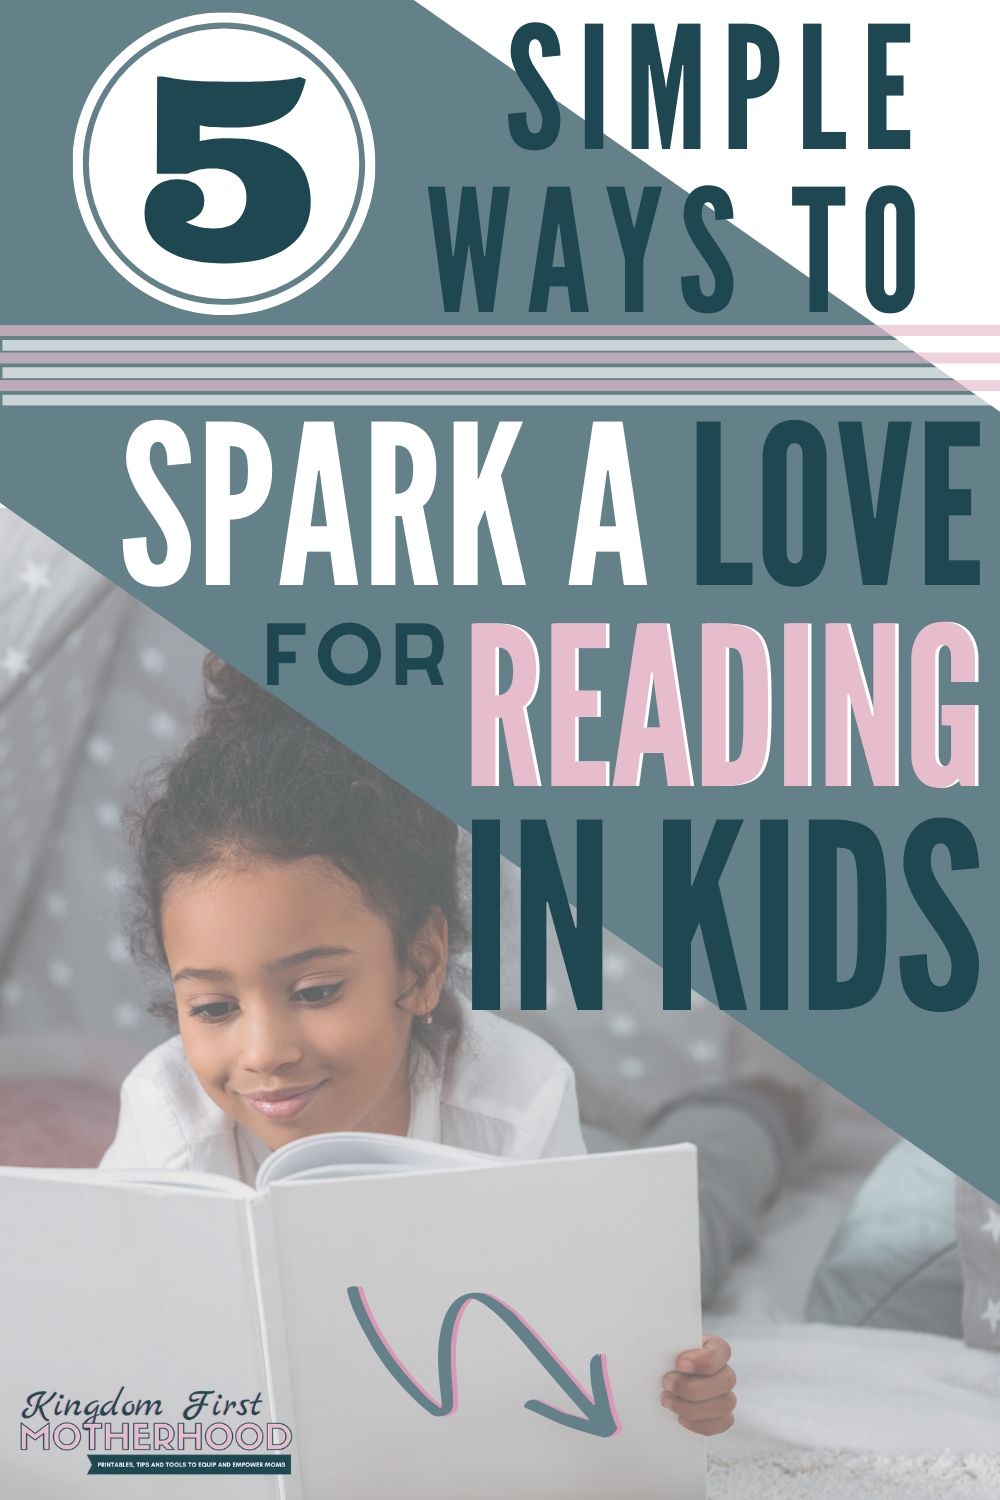 5 Simple Ways to Spark a Love for Reading in Kids this Summer